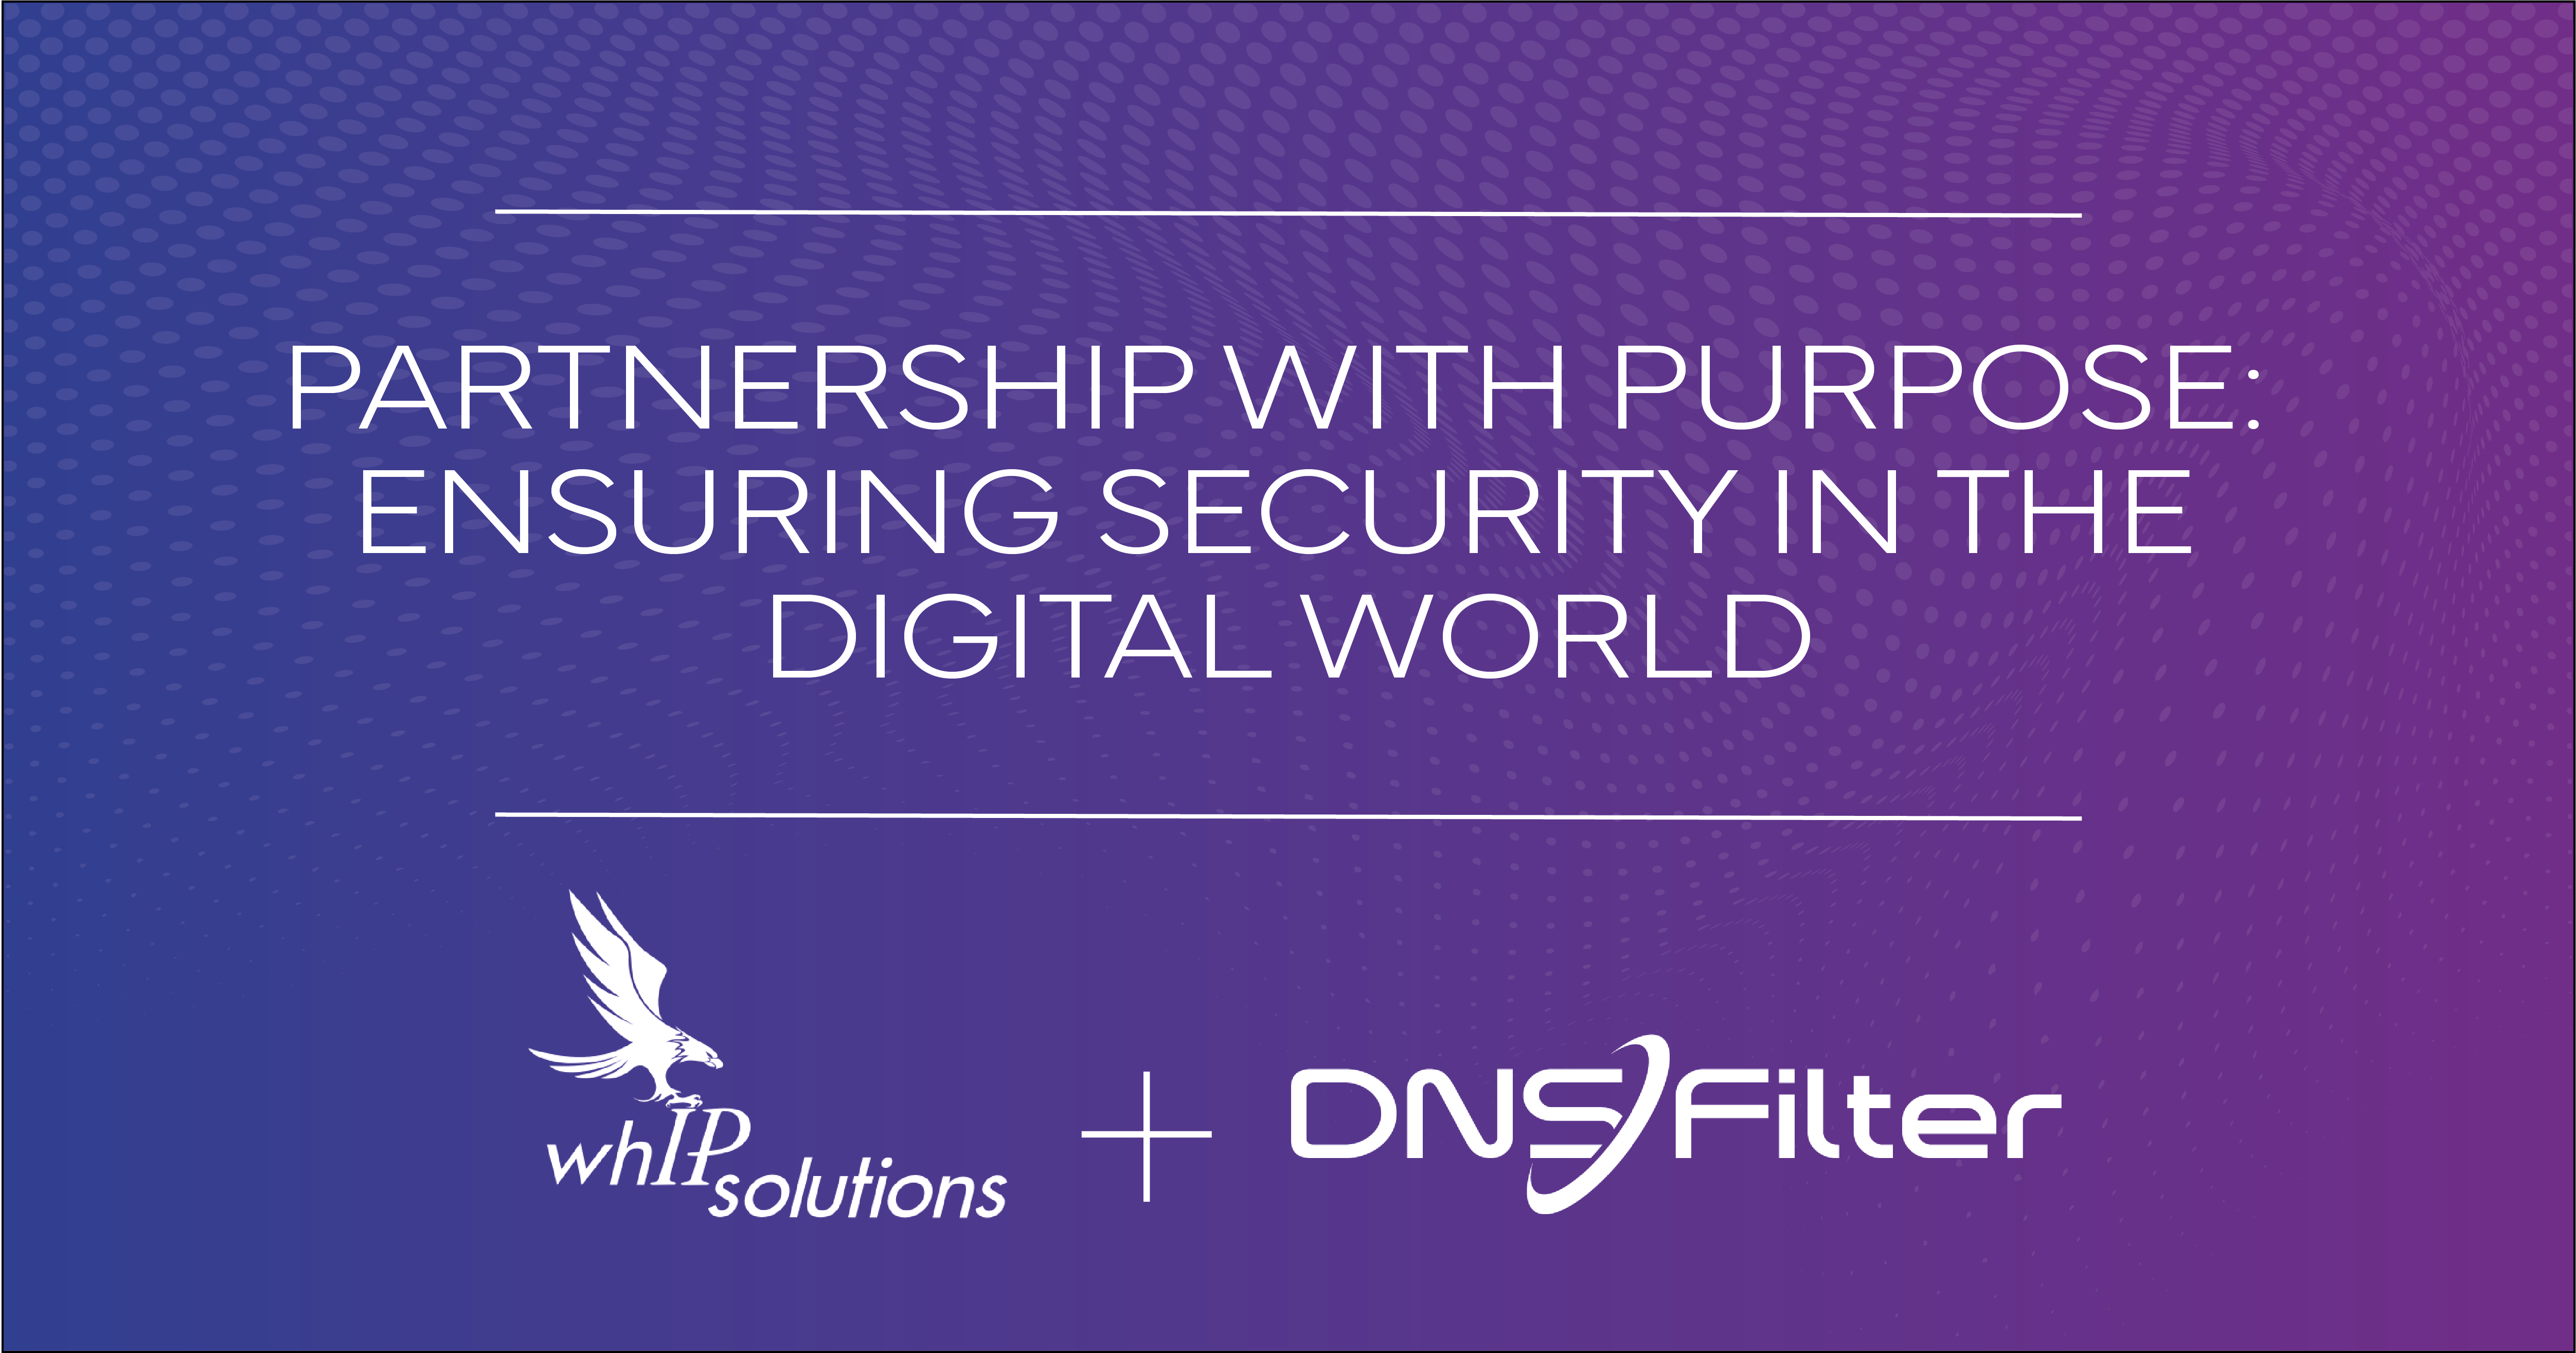 dnsfilter whip solutions partnership